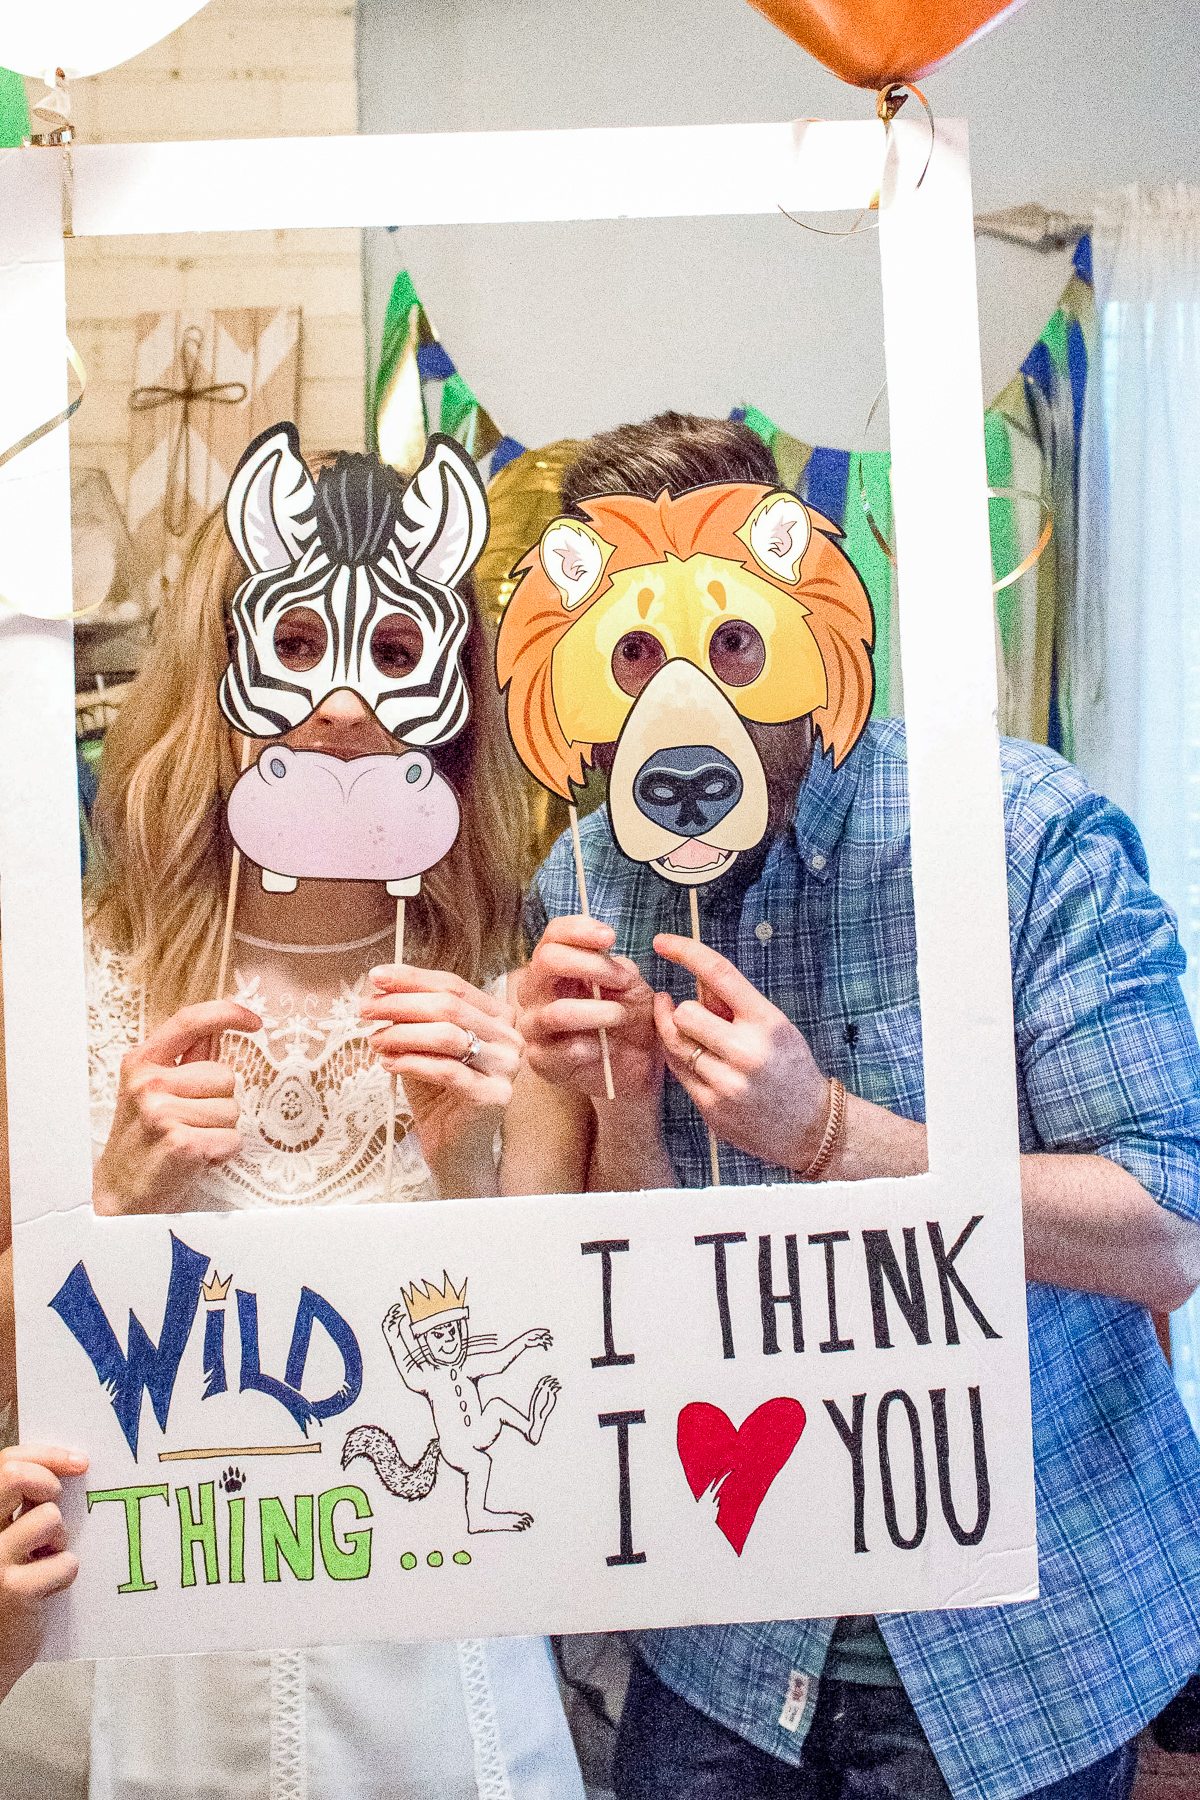 Wild One 1st birthday food ideas and party decorations, photo booth props, Alyssa Ashmore of Passionate Portions